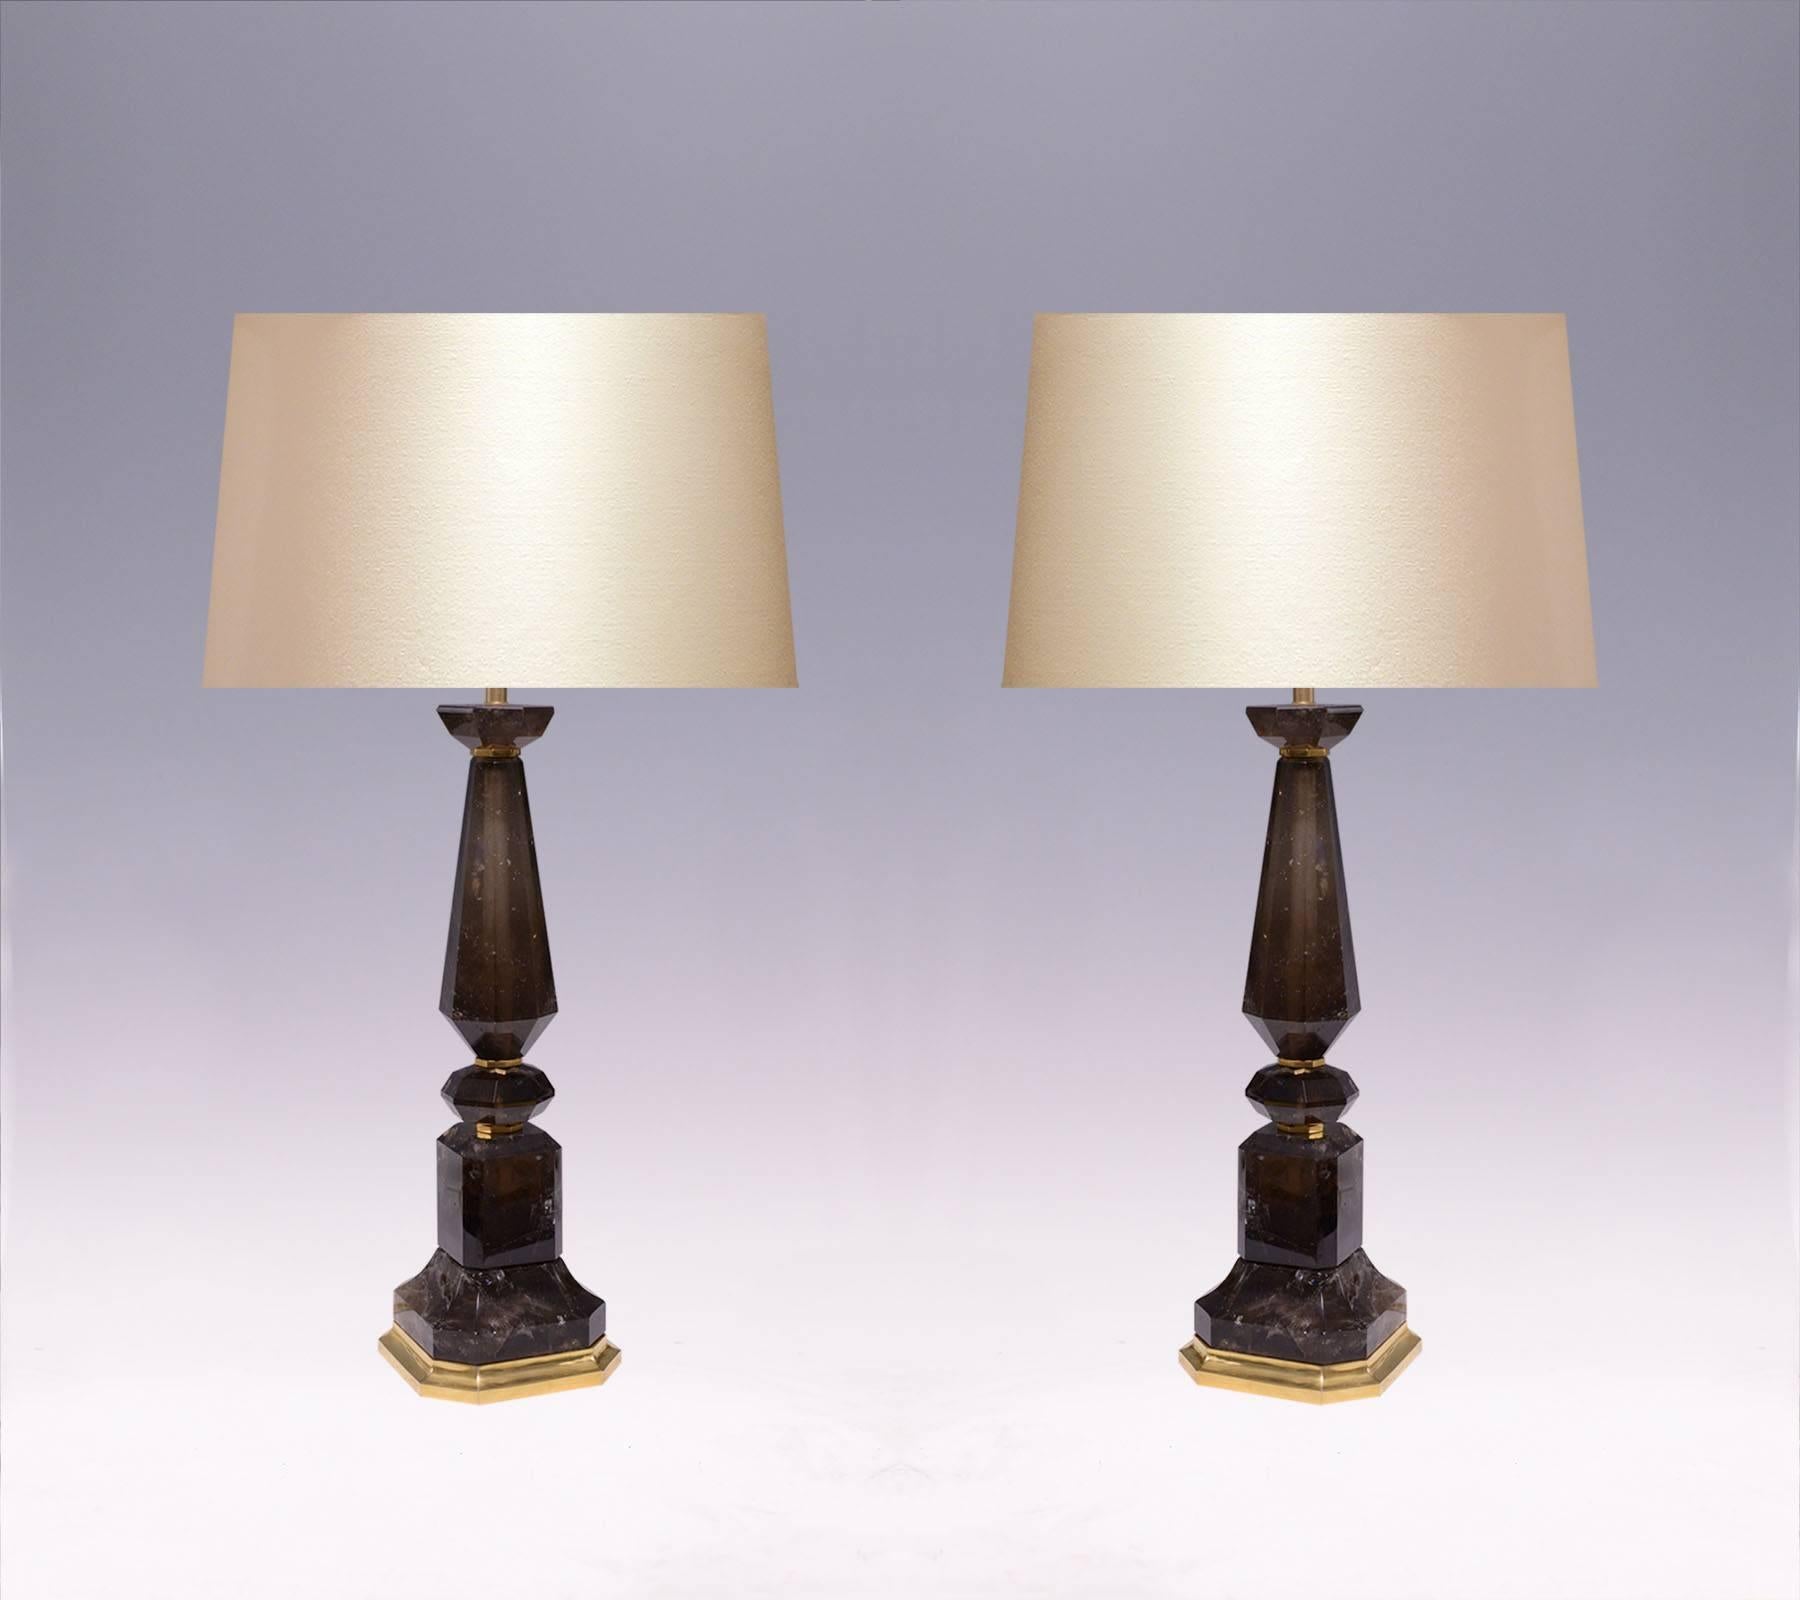 A pair of Fine carved smoky grey rock crystal quartz lamps with polished brass decorations.
To the rock crystal: 20